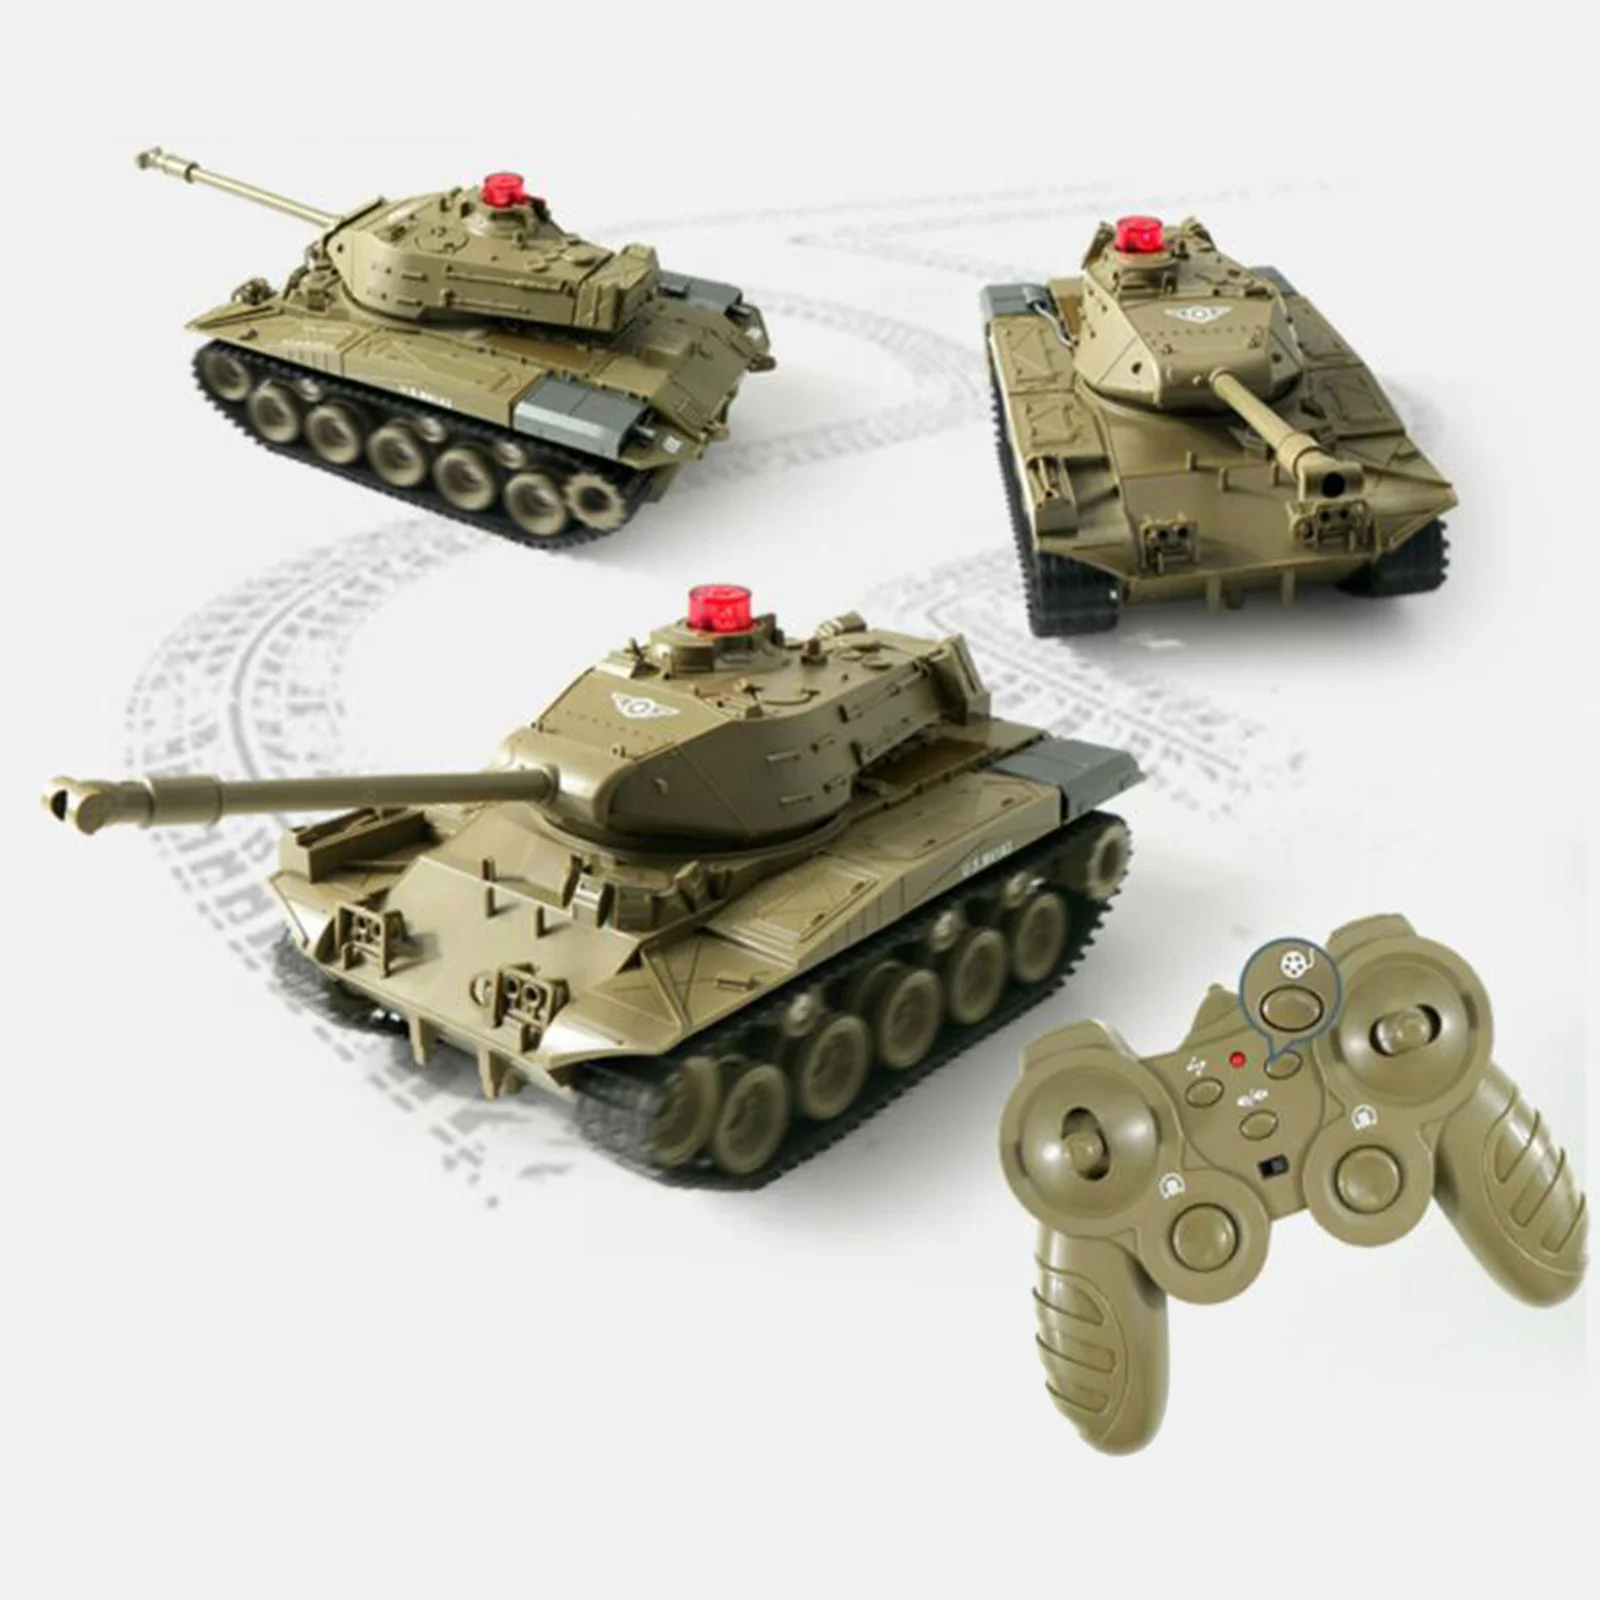 JJRC RC Tank Remote Control Battle Tank Toy That Shoots with Lights & Realistic Sounds RC Vehicle 270Rotational Toy Truck